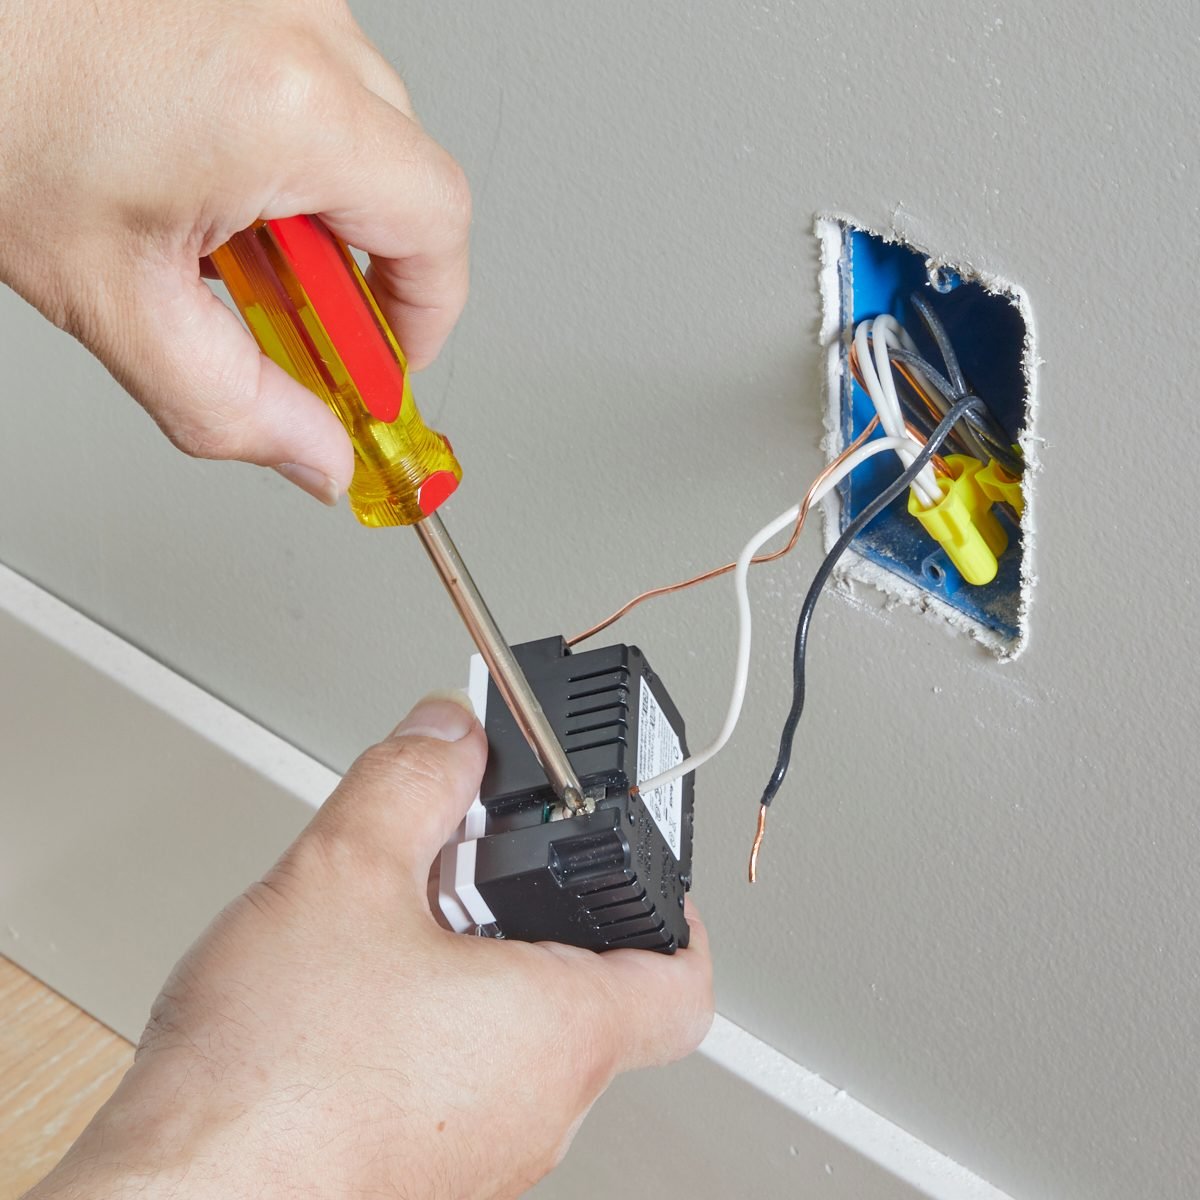 Home Electrical Wiring Tips And Safety, How To Put Wiring In A House